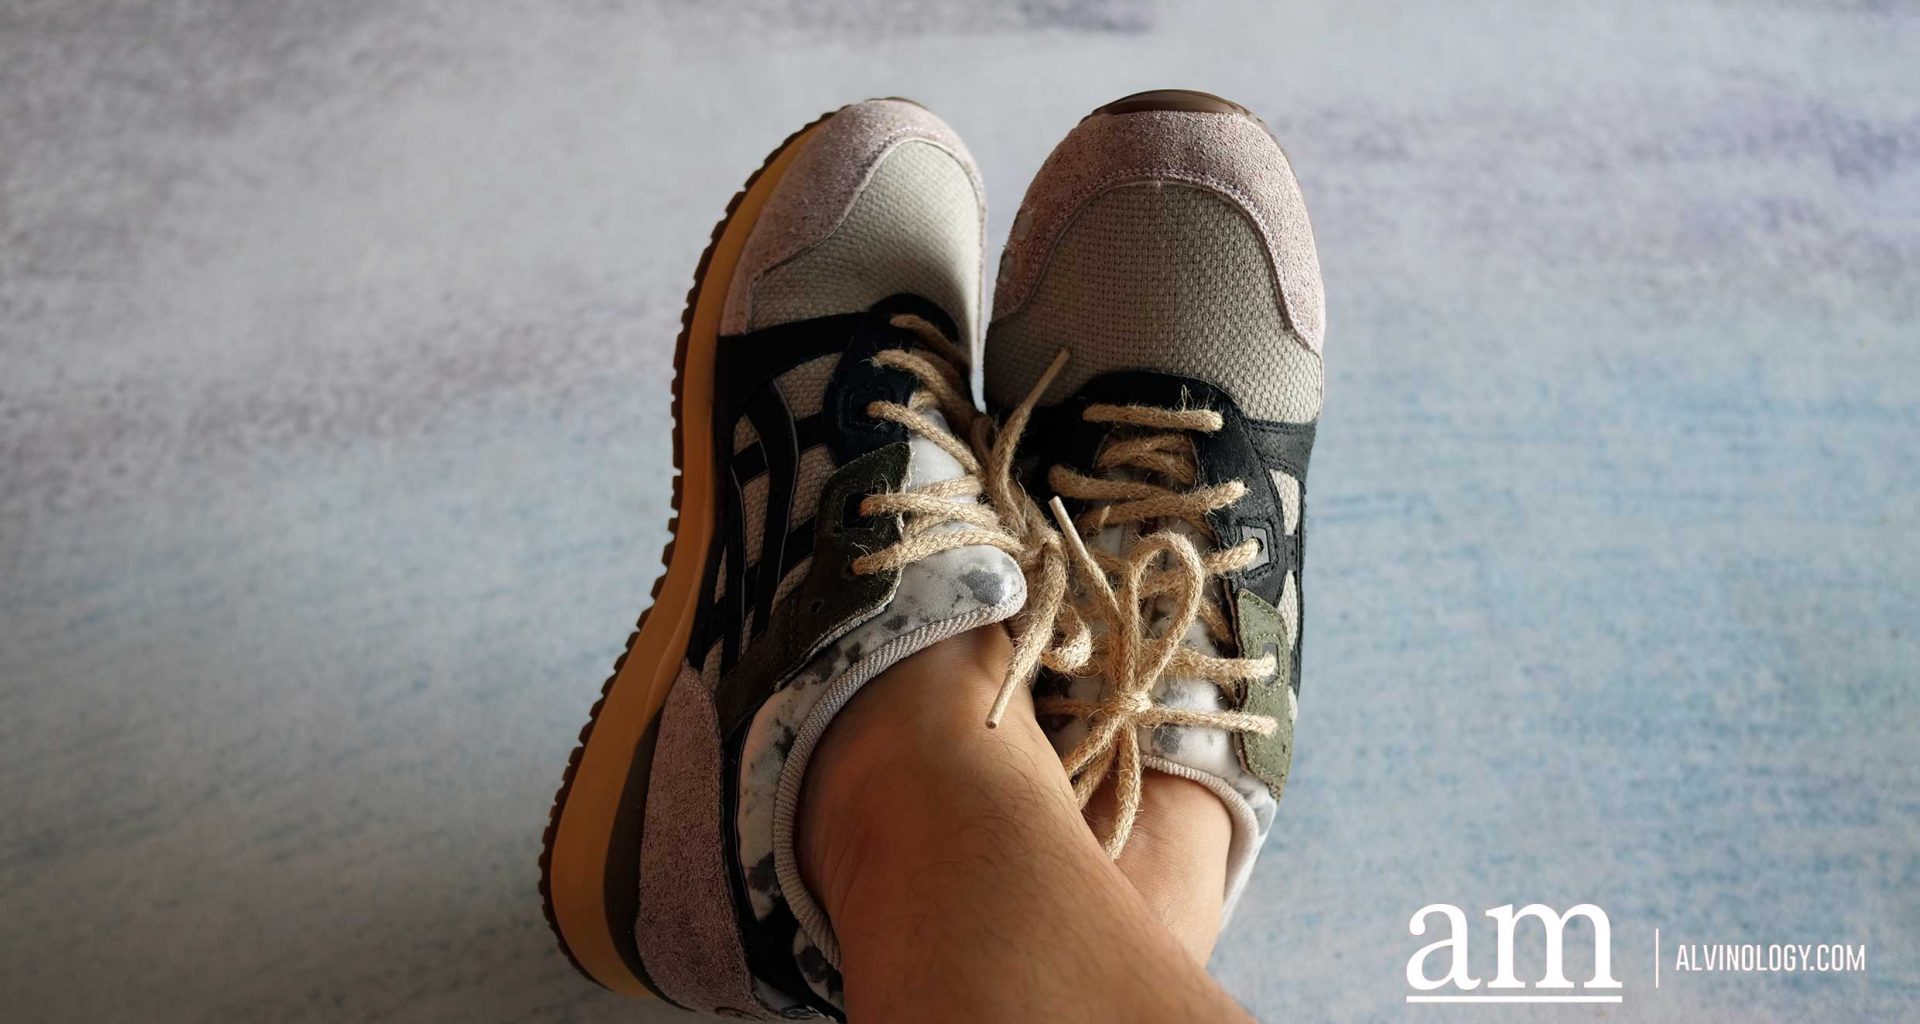 [Review] ASICS Sportsyle's Iconic Gel-Lyte III OG gets an eco-friendly rework - here are two sneakers that care for the planet - Alvinology